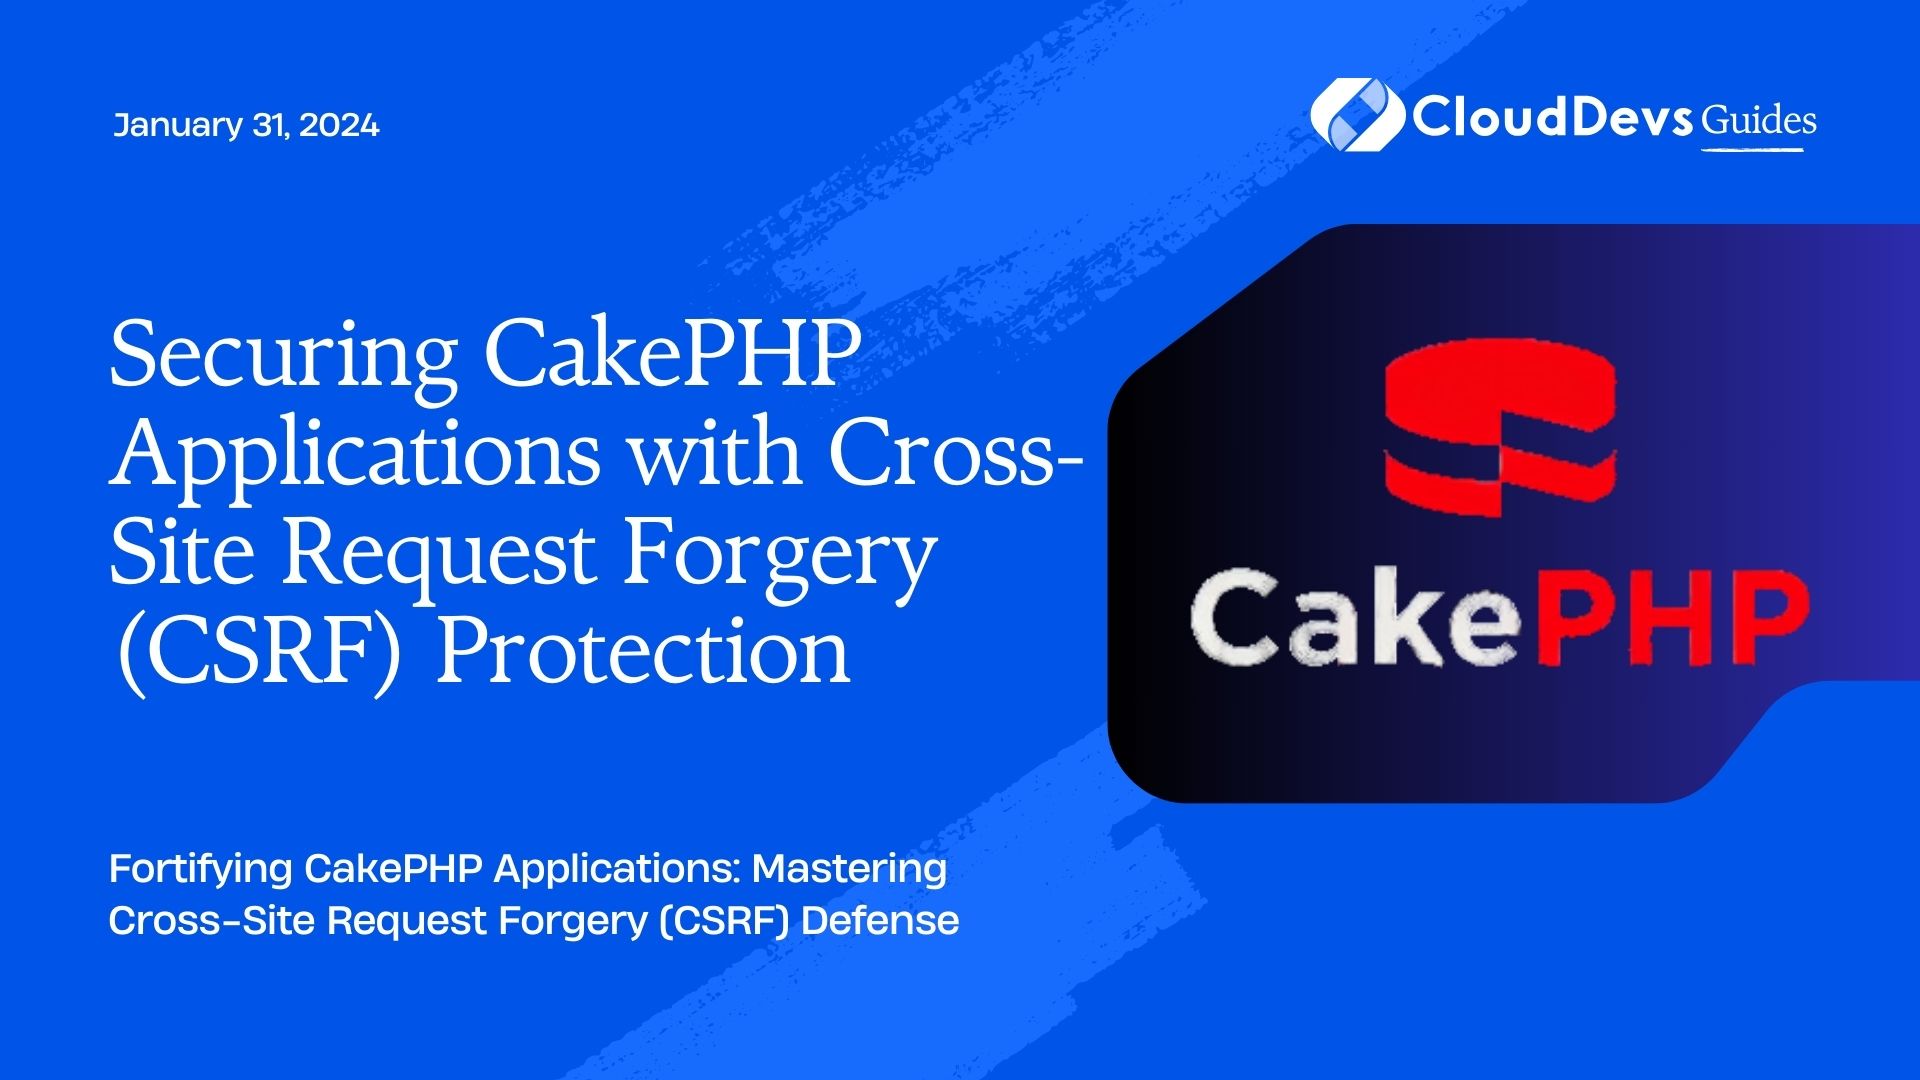 Securing CakePHP Applications with Cross-Site Request Forgery (CSRF) Protection